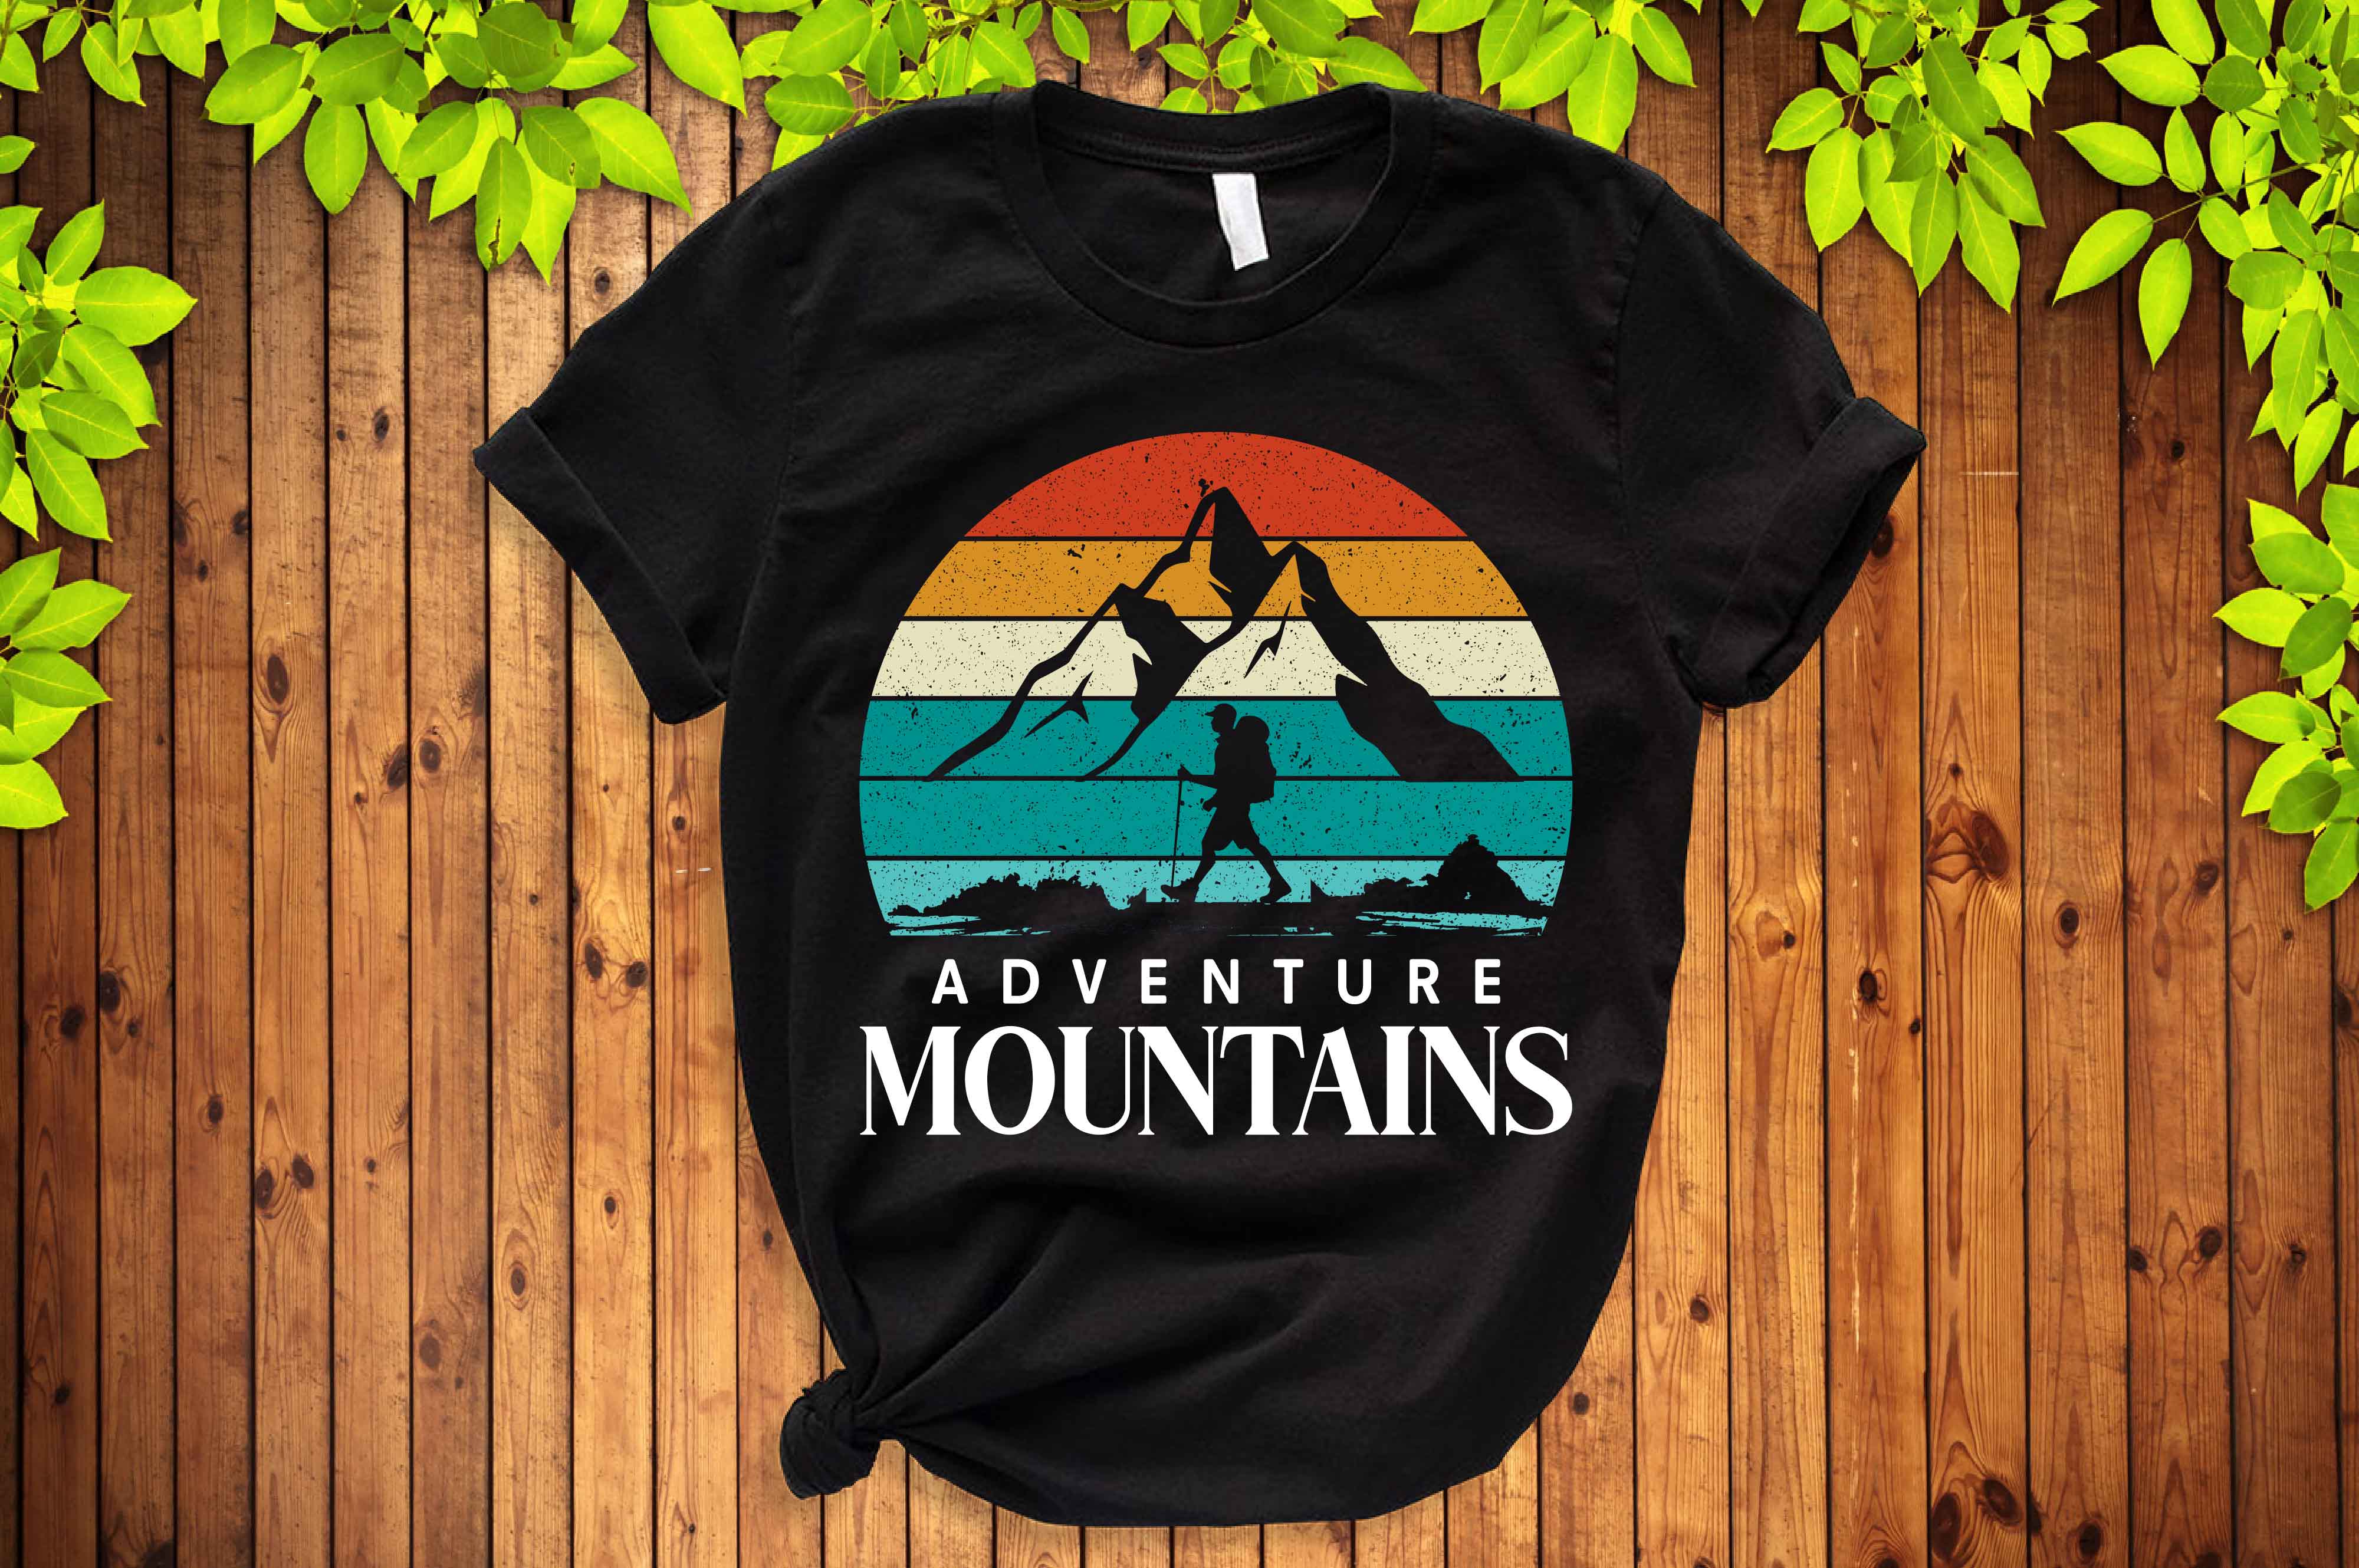 T - shirt that says adventure mountains on it.